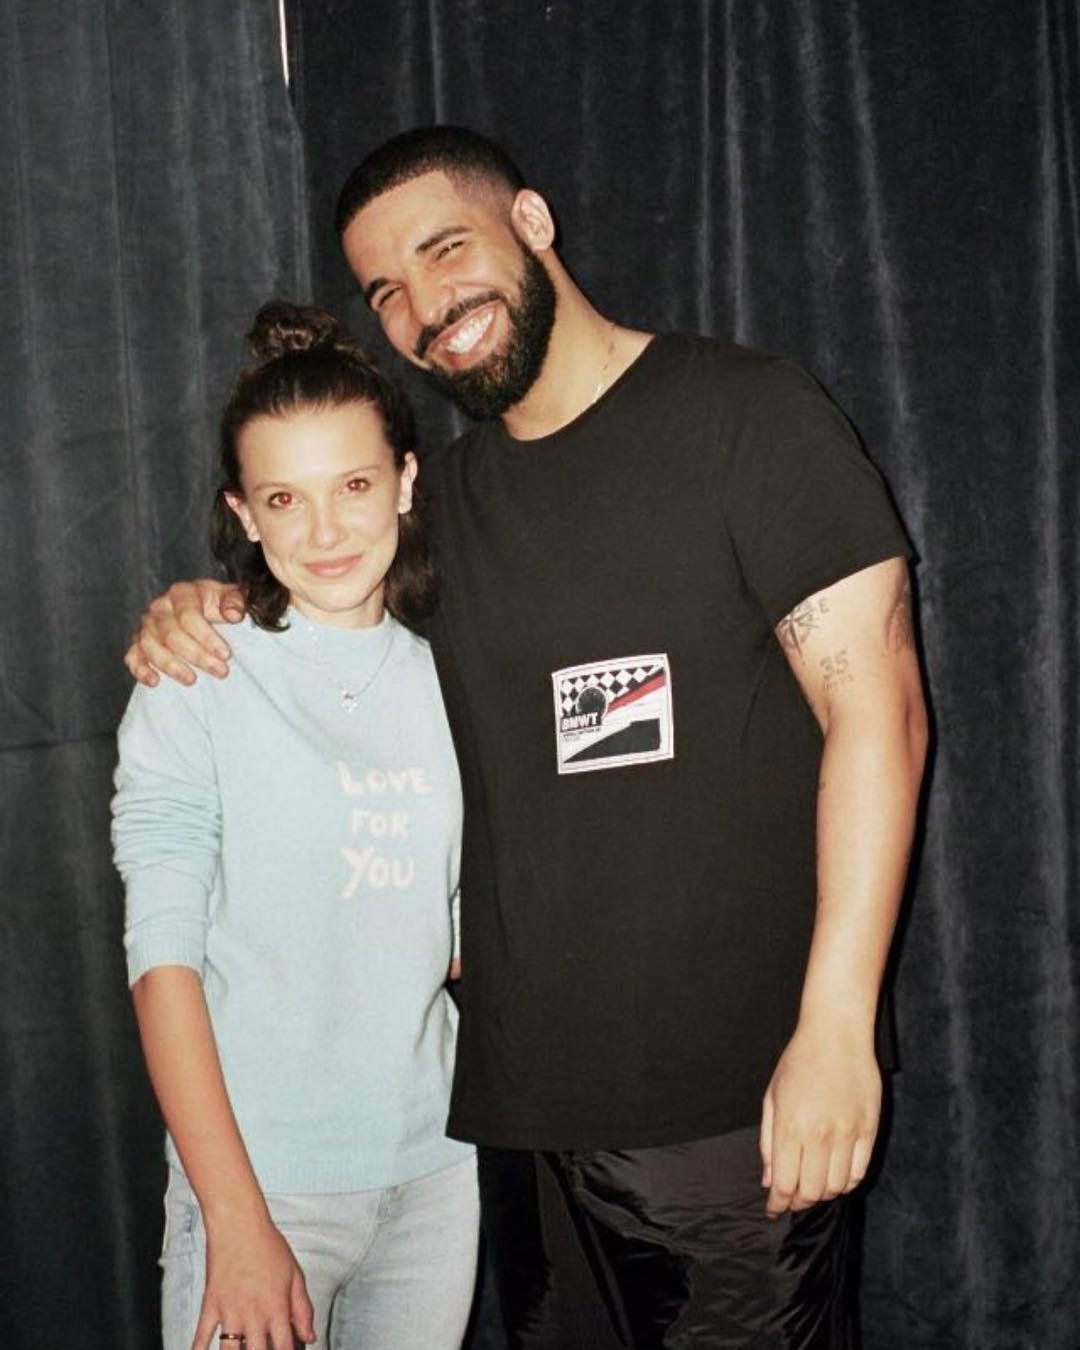 Drake and Millie Bobby Brown Share Epic Instagrams Together